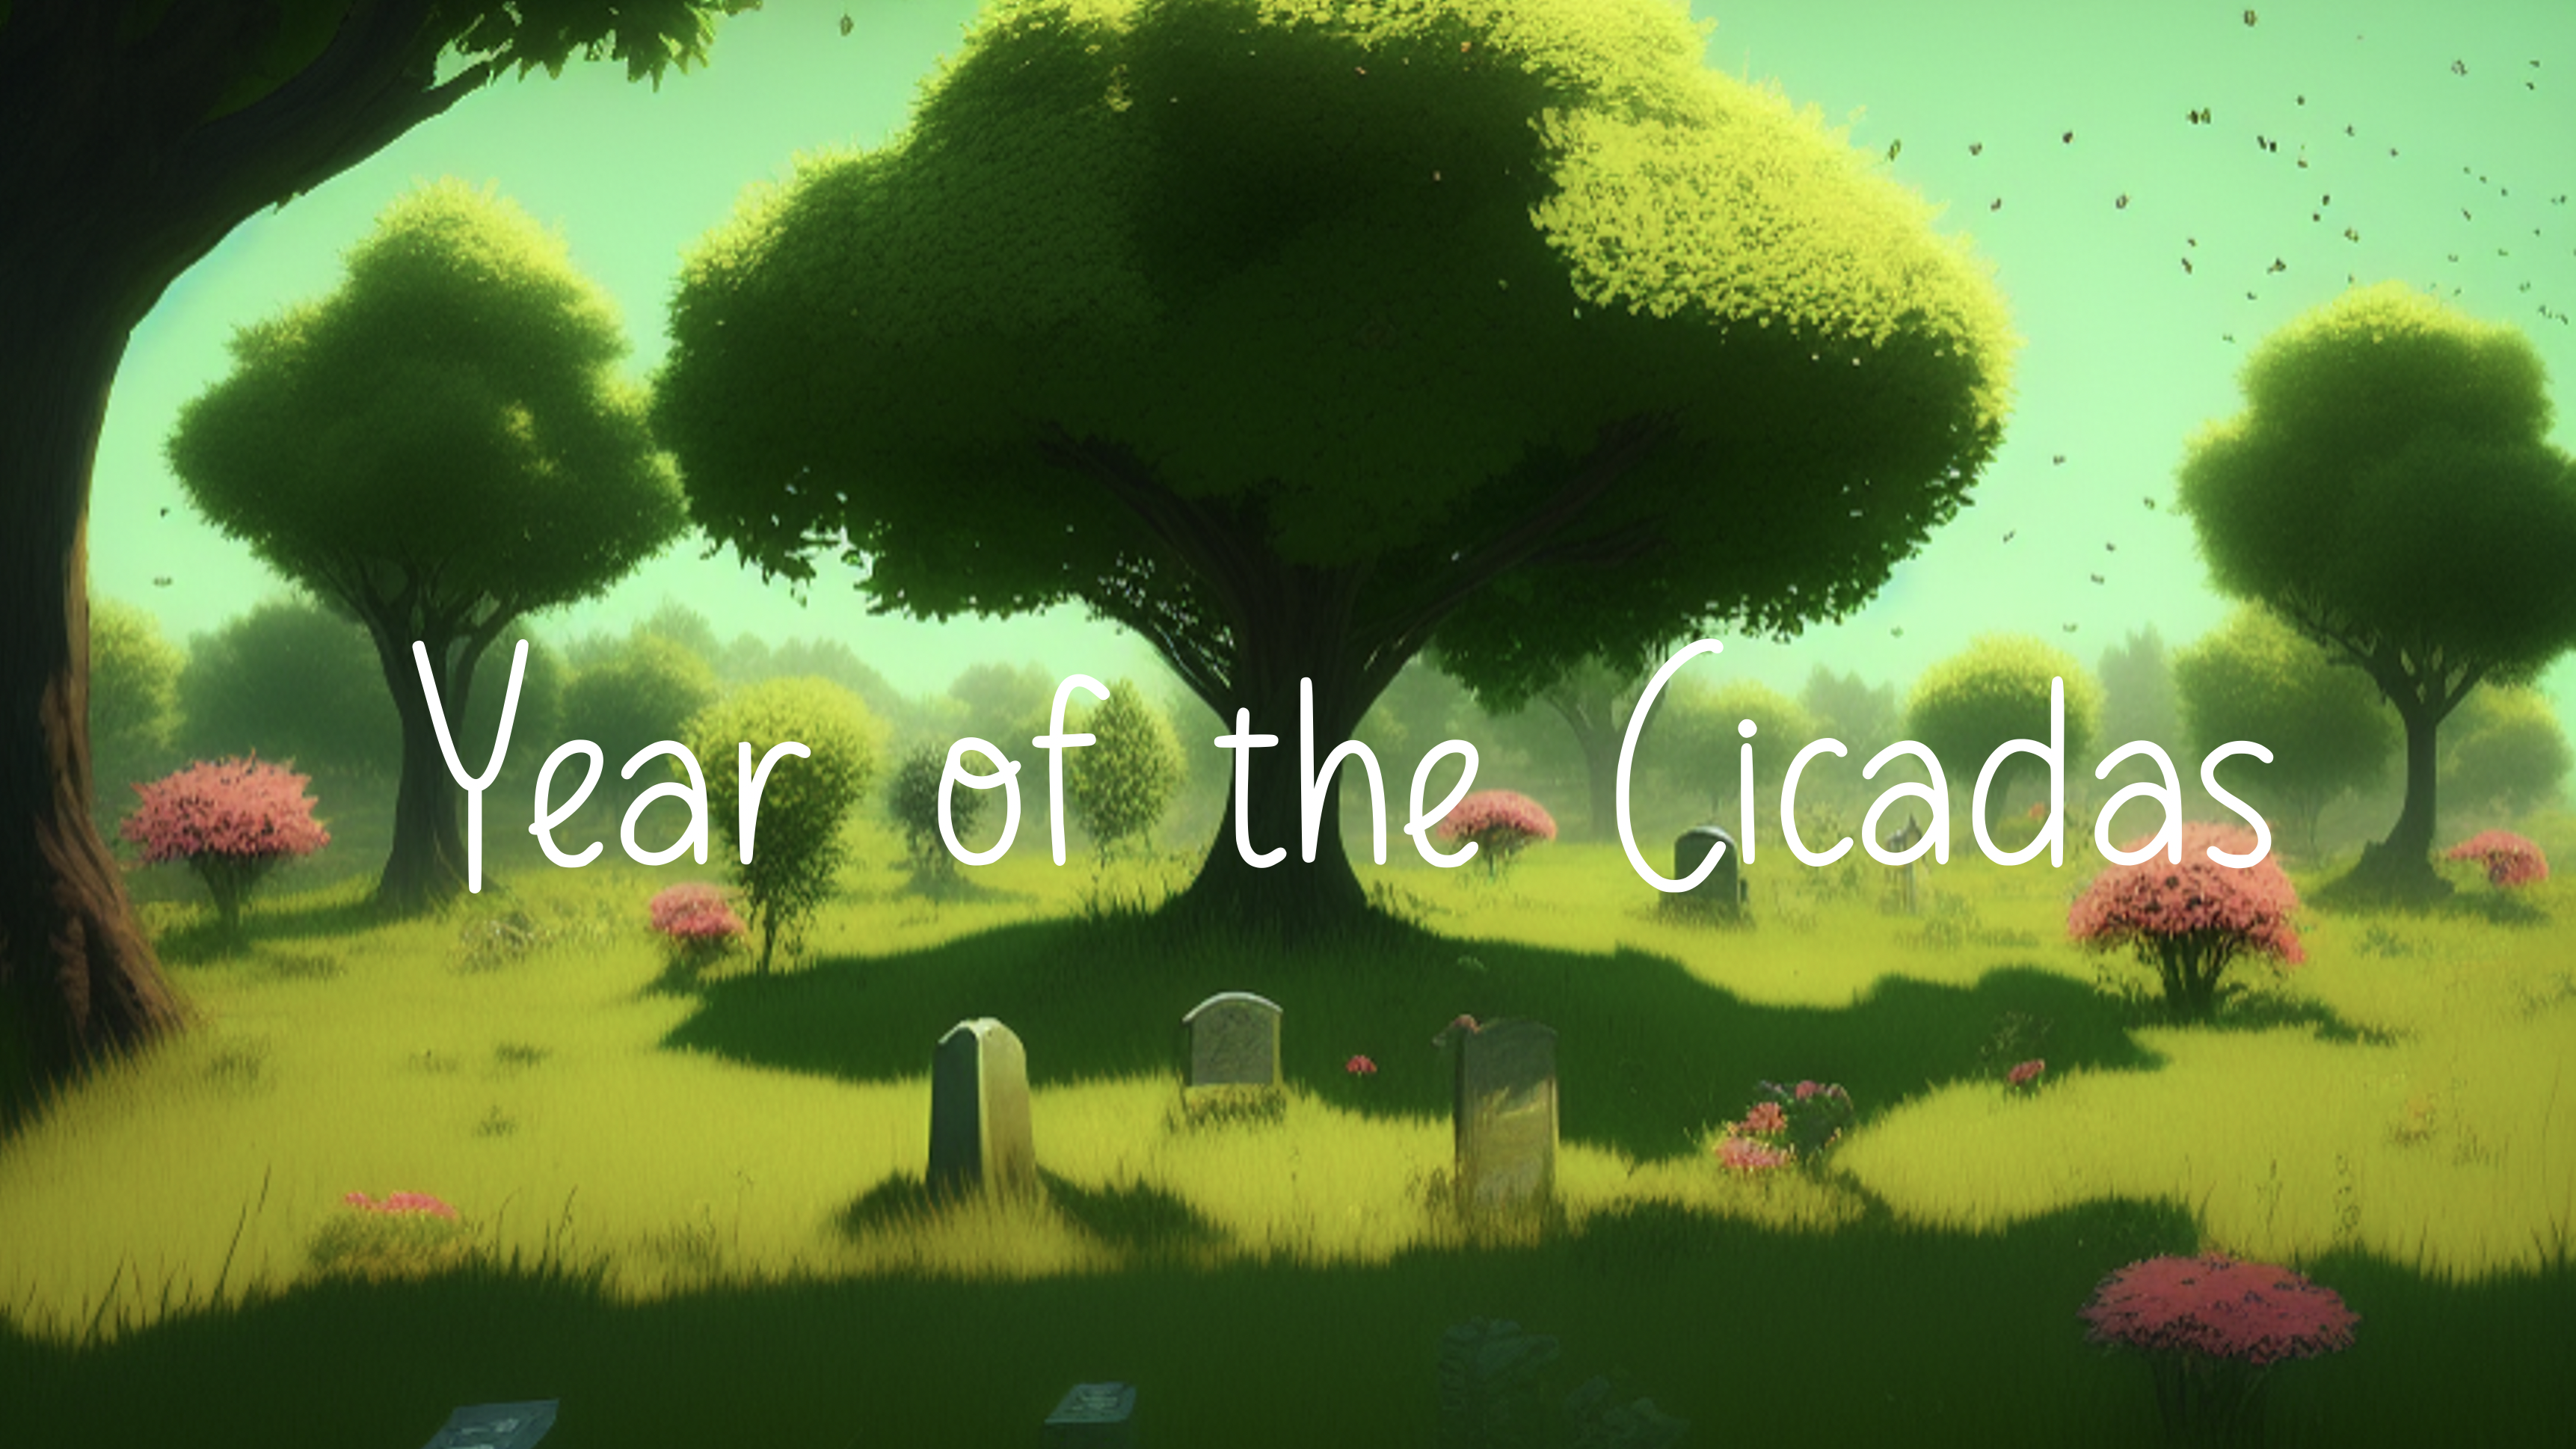 Promotional image for Year of the Cicadas, a VR experience